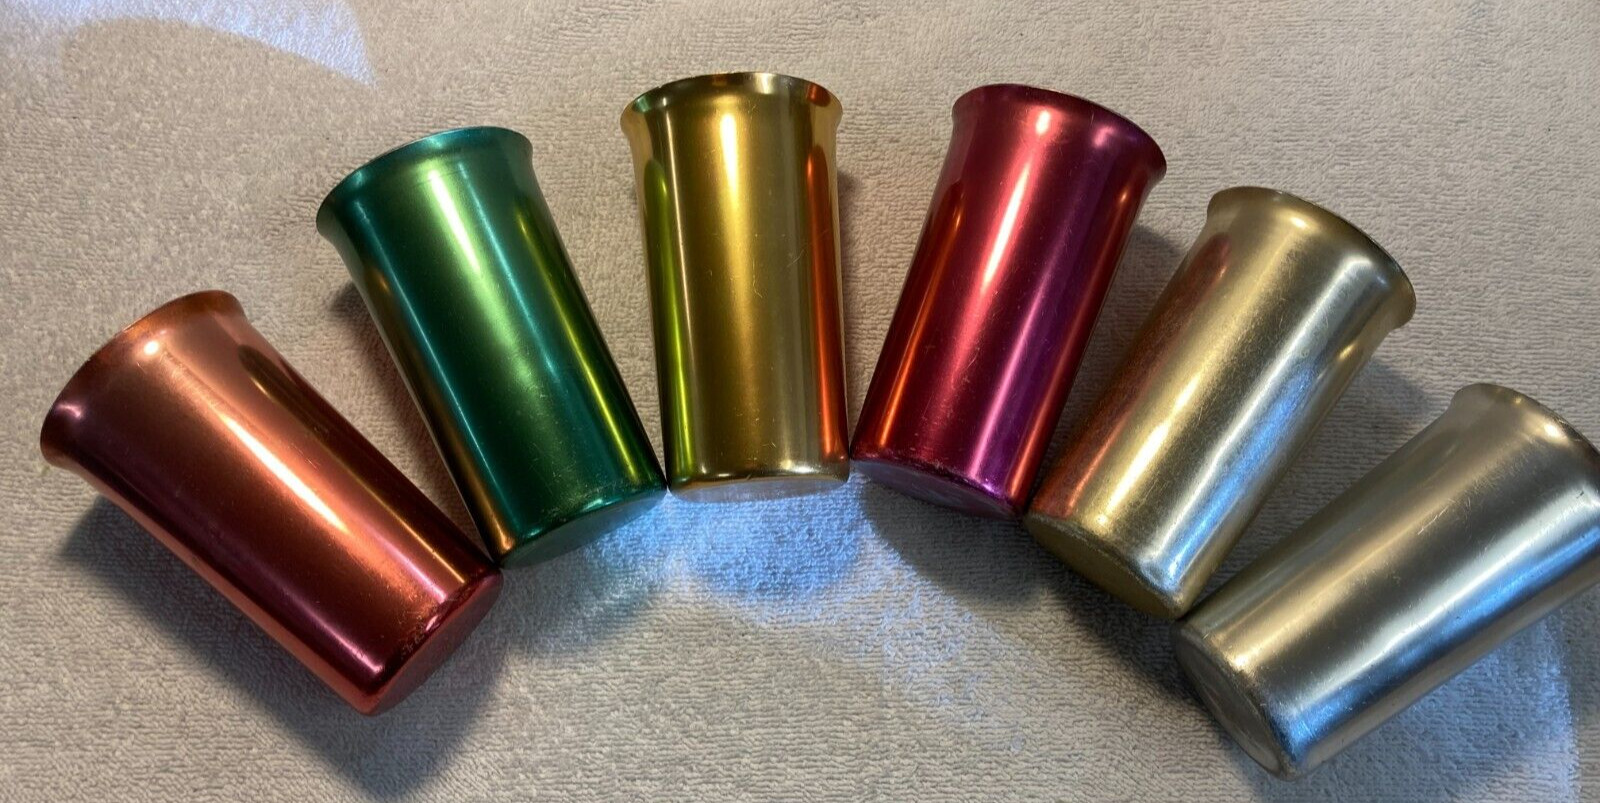 Lot of 6 Vintage Anodized Aluminum Drinking Tumblers Multicolor